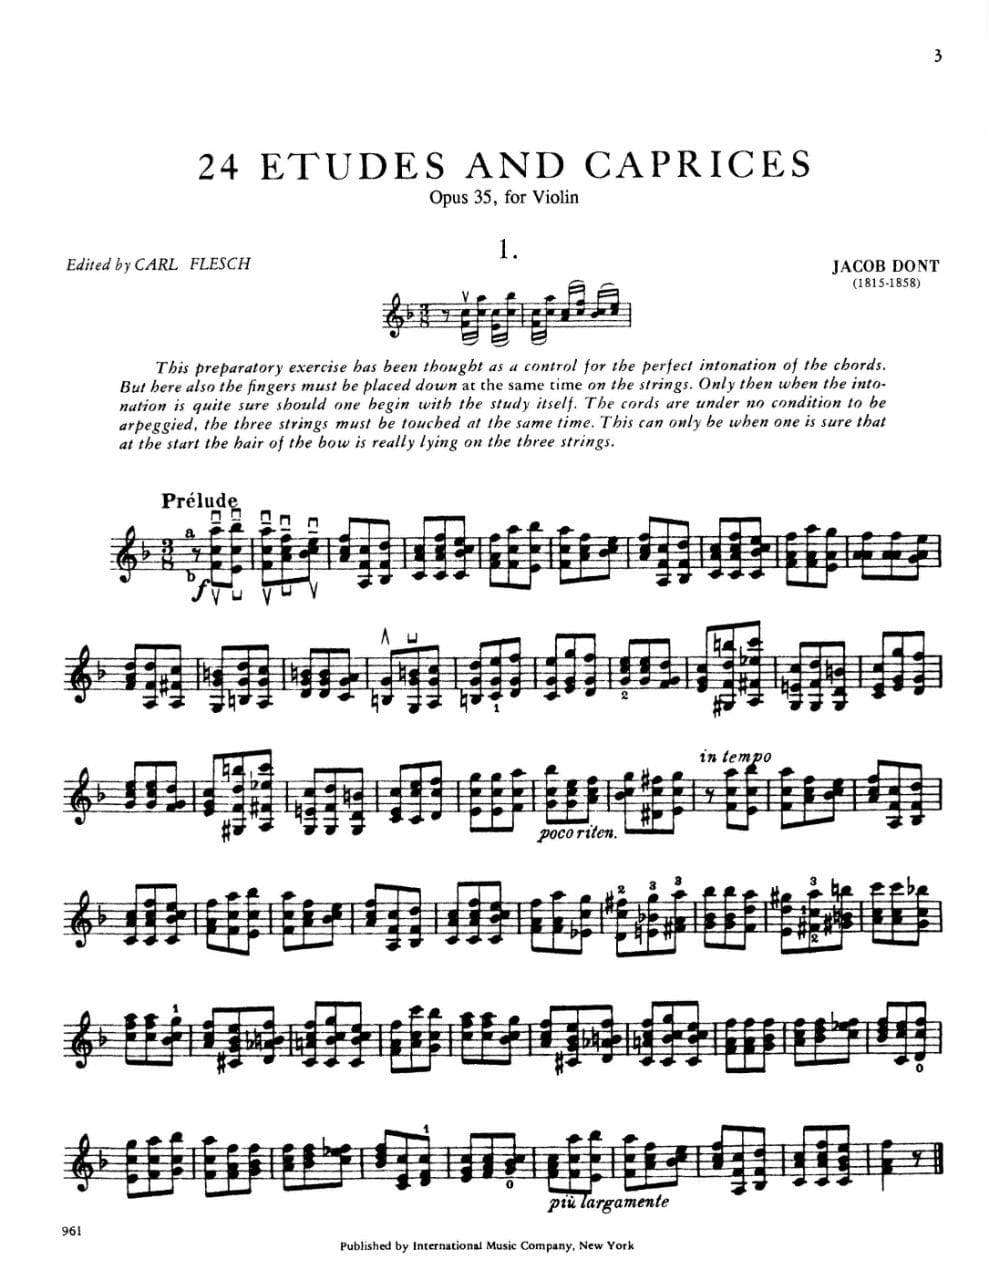 Dont, Jakob - 24 Etudes and Caprices, Op 35 - Violin solo - edited by Carl Flesch - International Edition